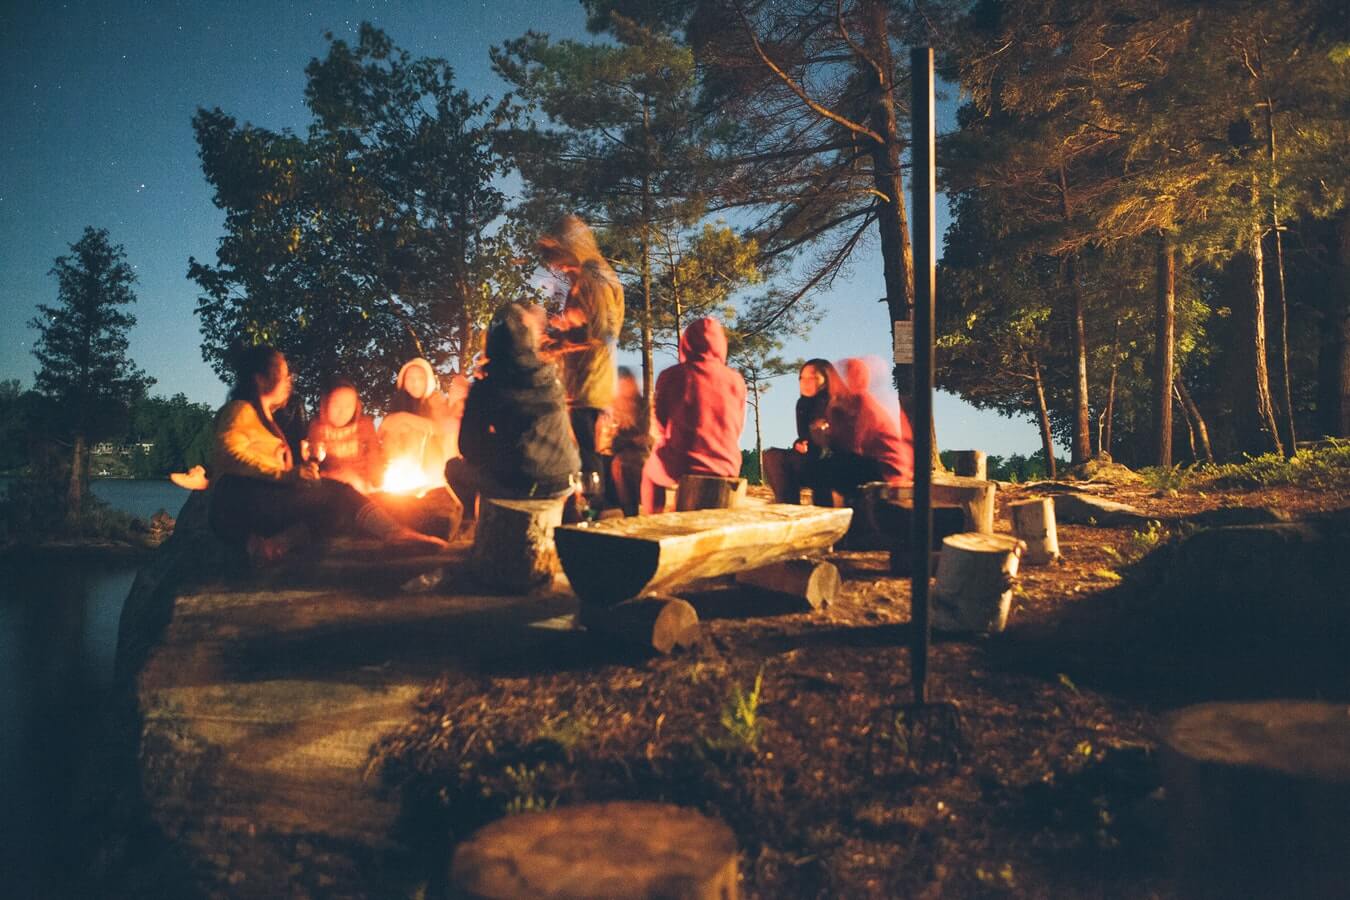 A group outside sitting around a bonfire on the edge of a lake in an early evening.